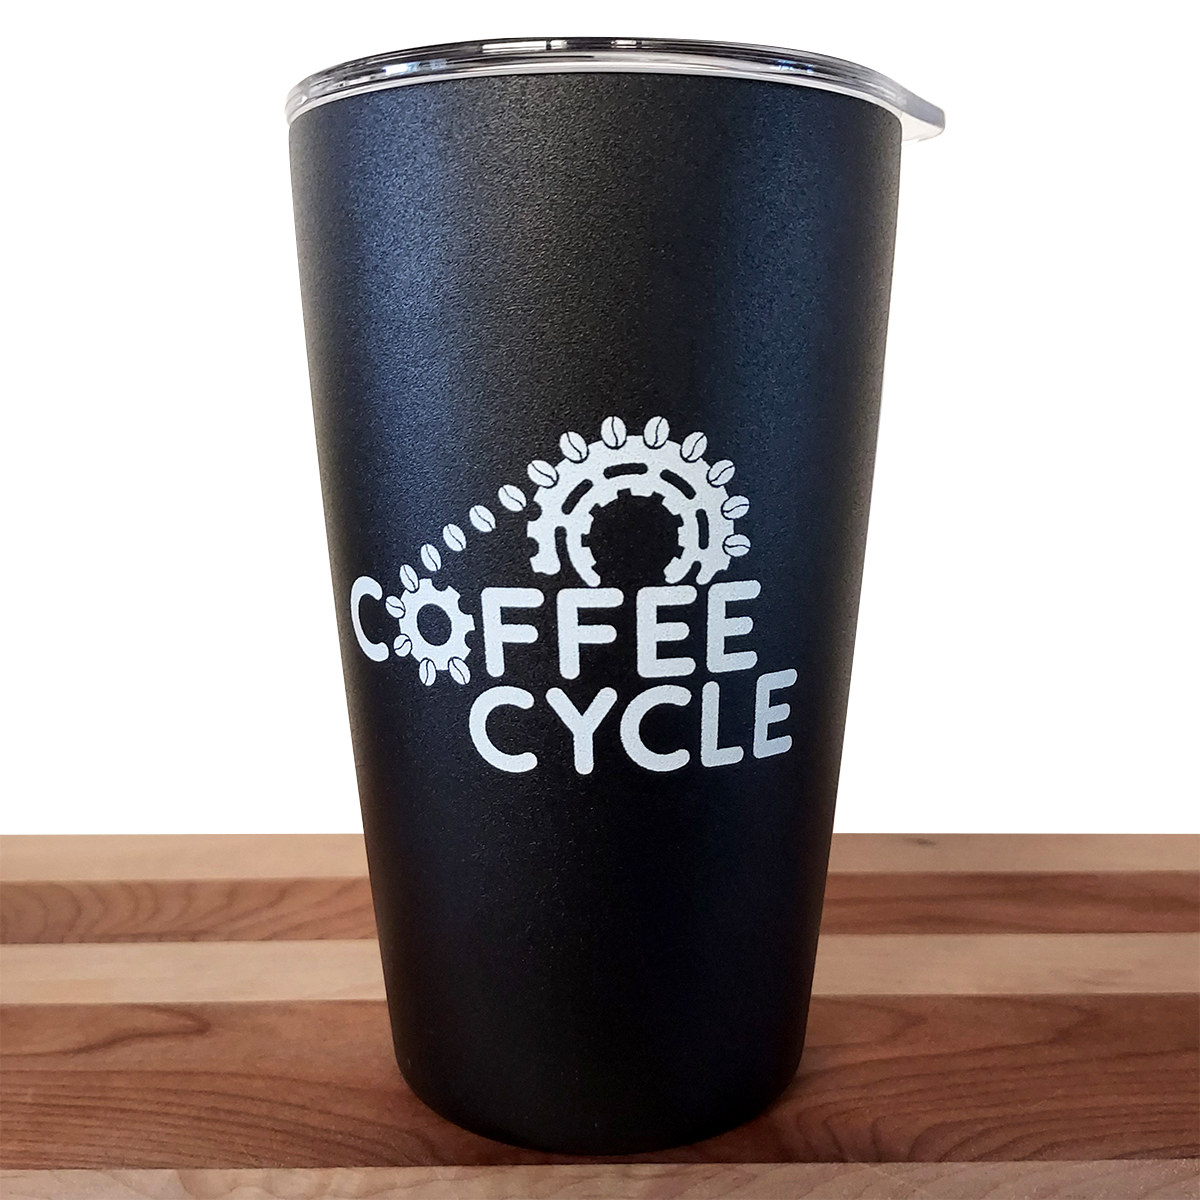 Black Coffee Cycle tumblr with the logo in white.